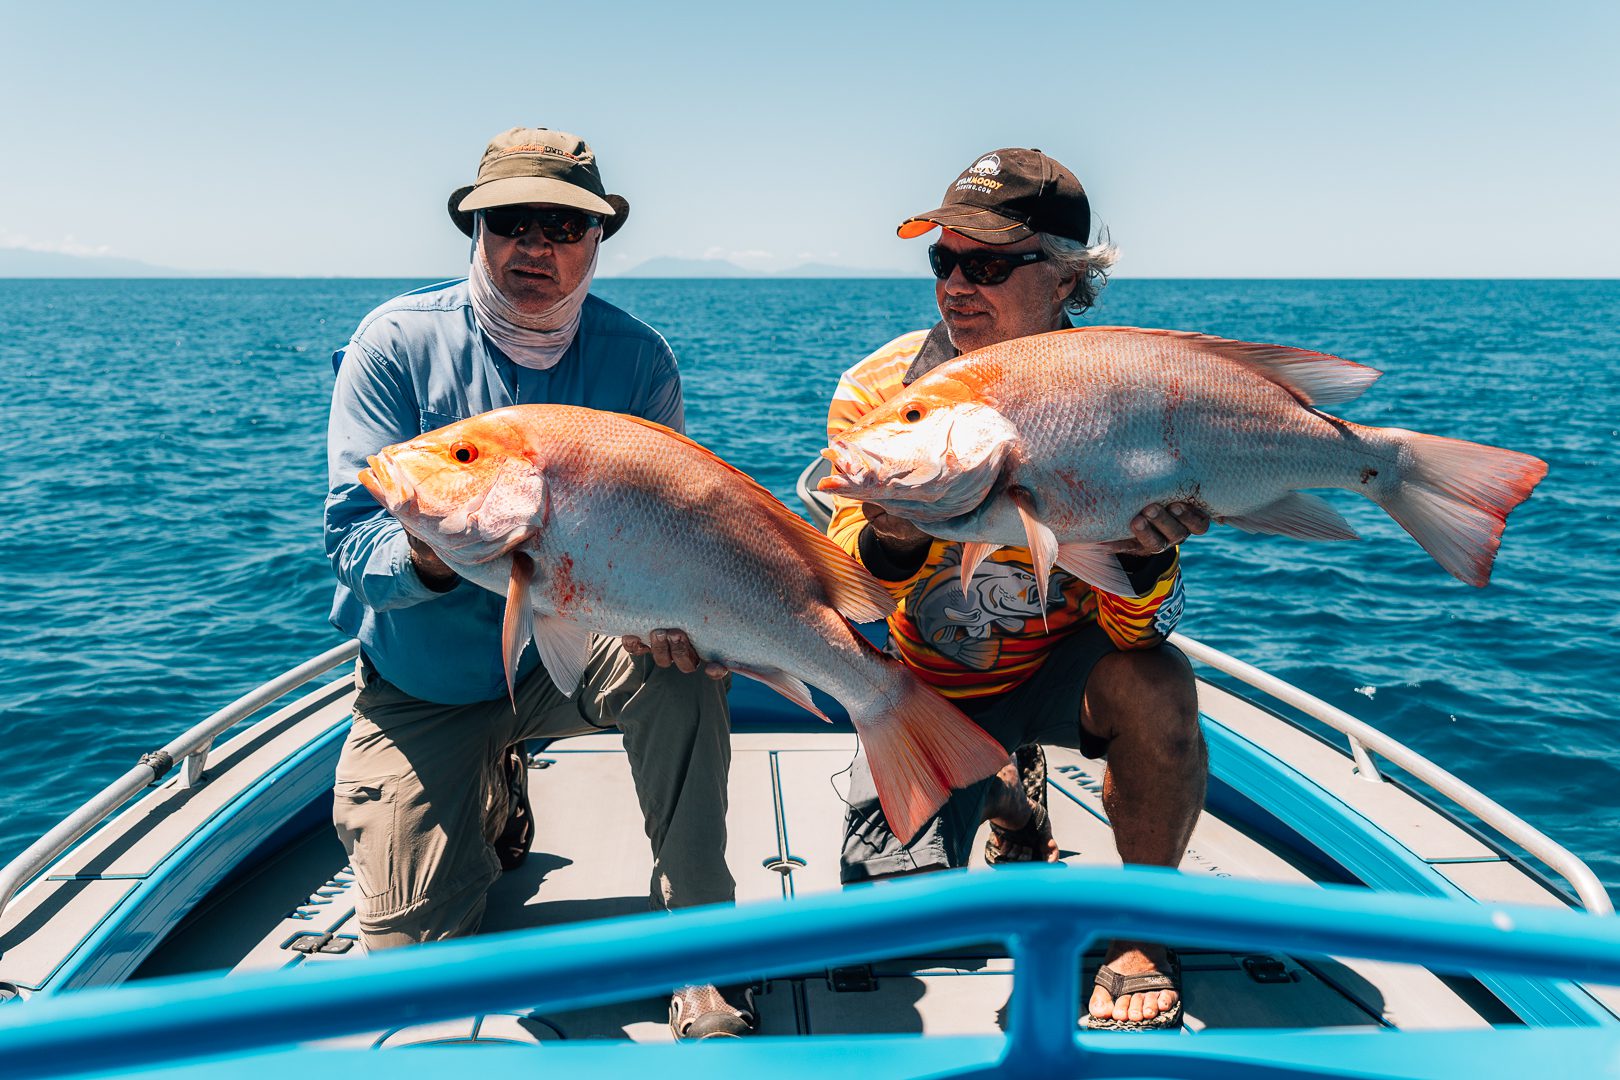 Large mouth nannygai fishing offshore Cairns